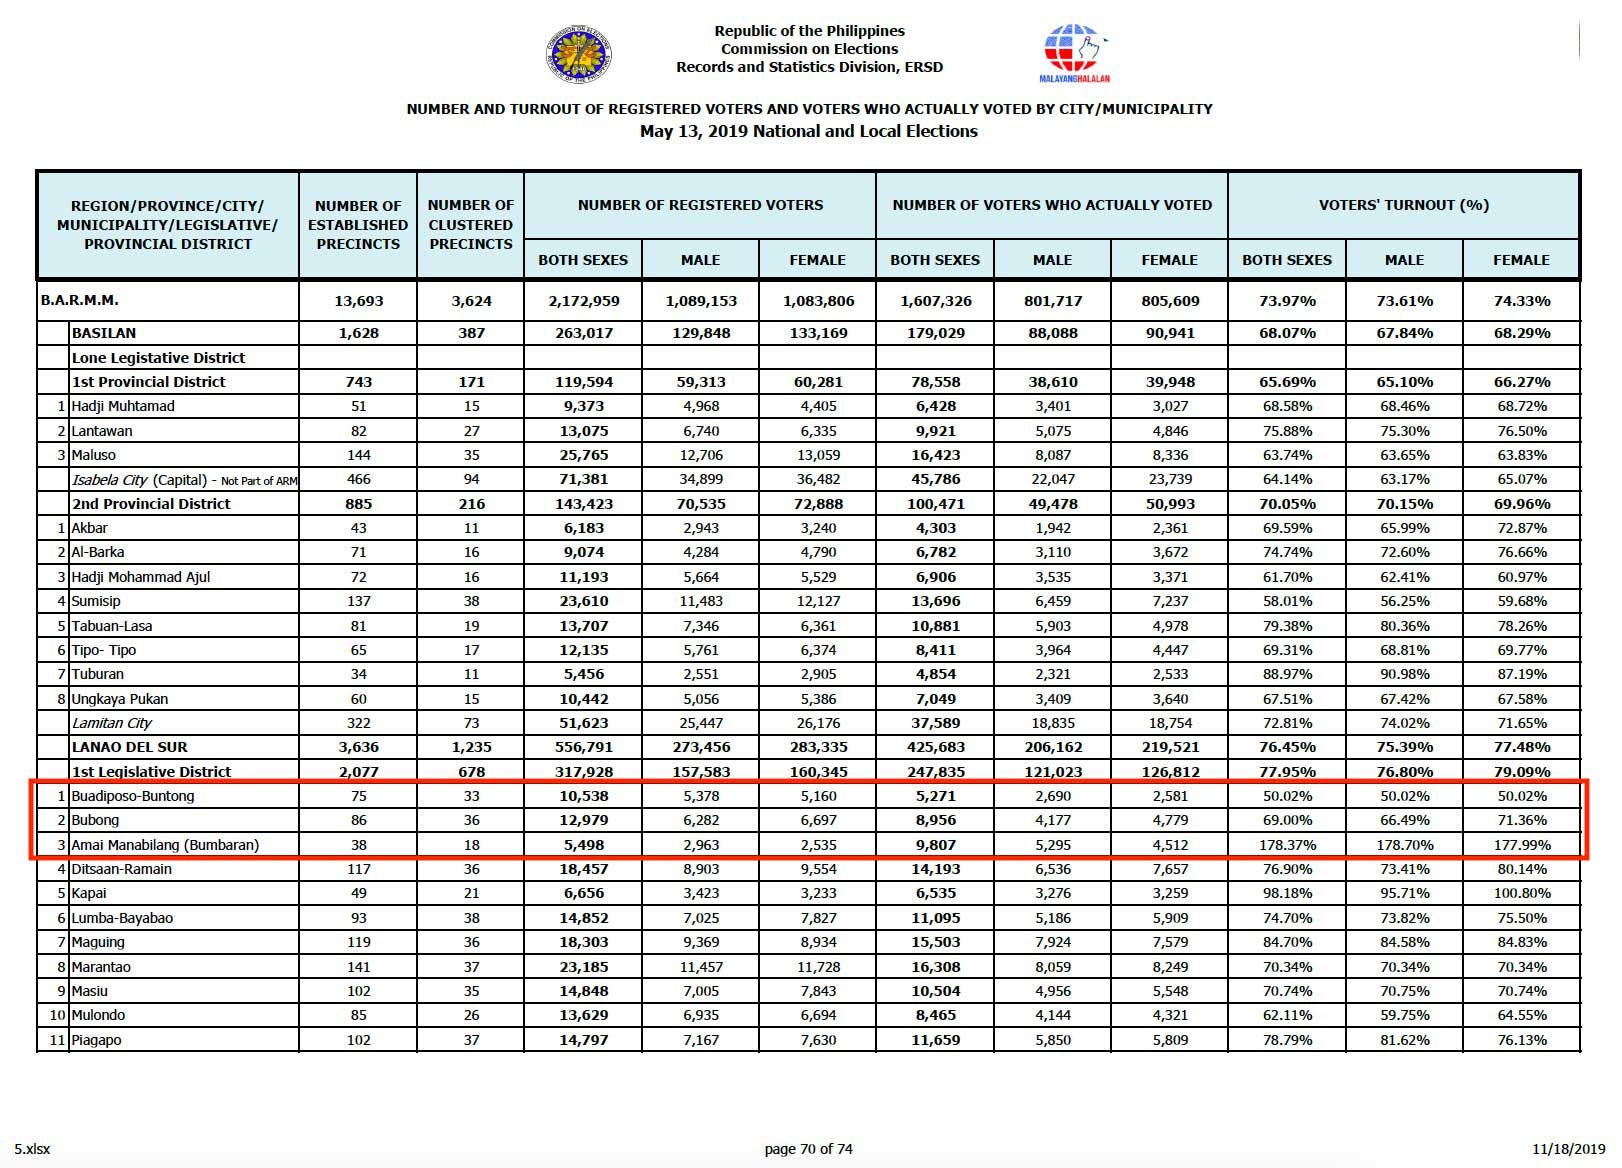 Screenshot of Comelec summary report reflecting 178% voter turnout for Amai Manabilang, Lanao del Sur town 